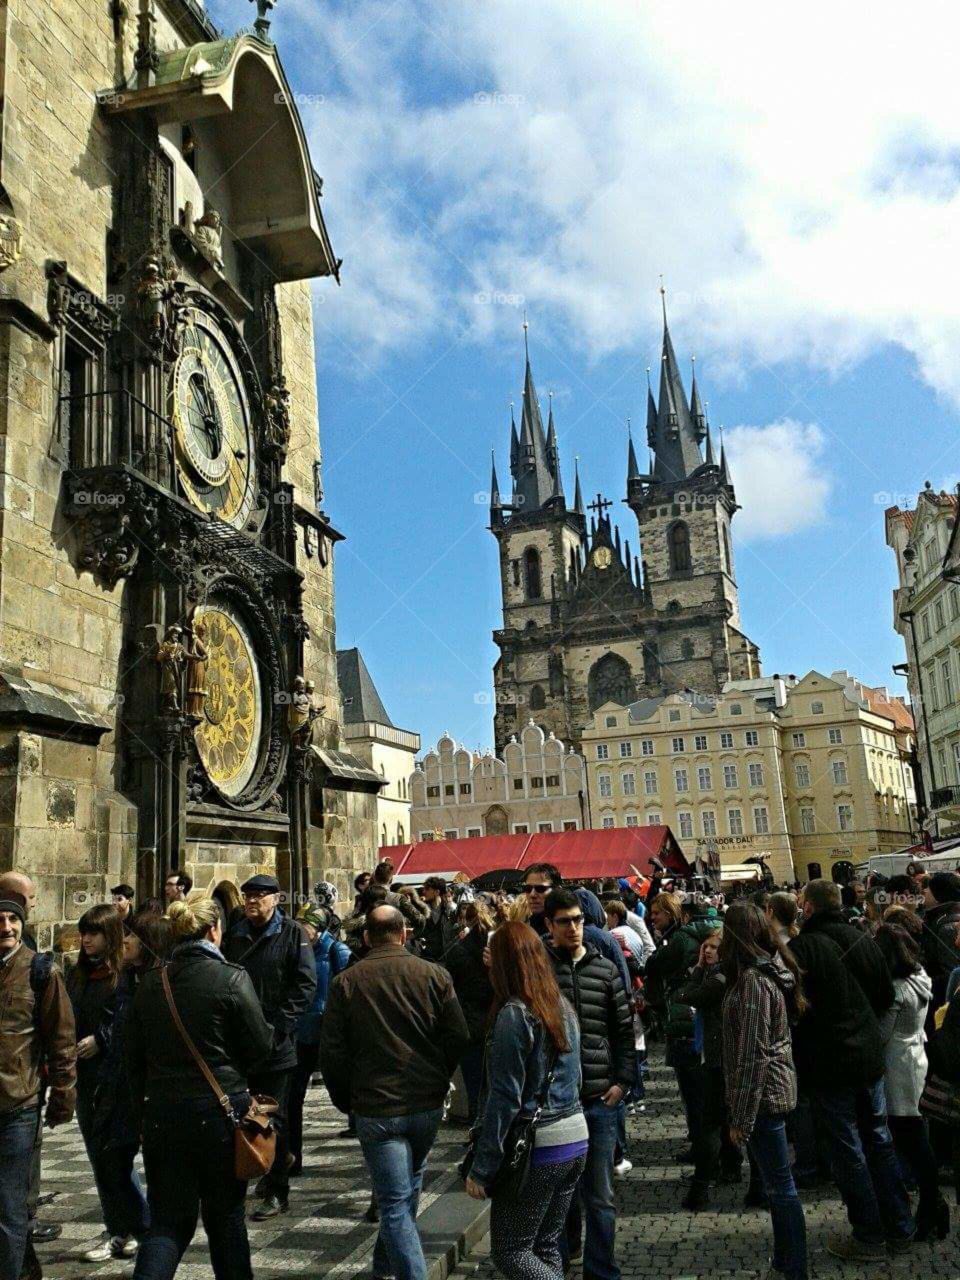 it's so interesting to watch the huge amount of tourists flock to see this old clock